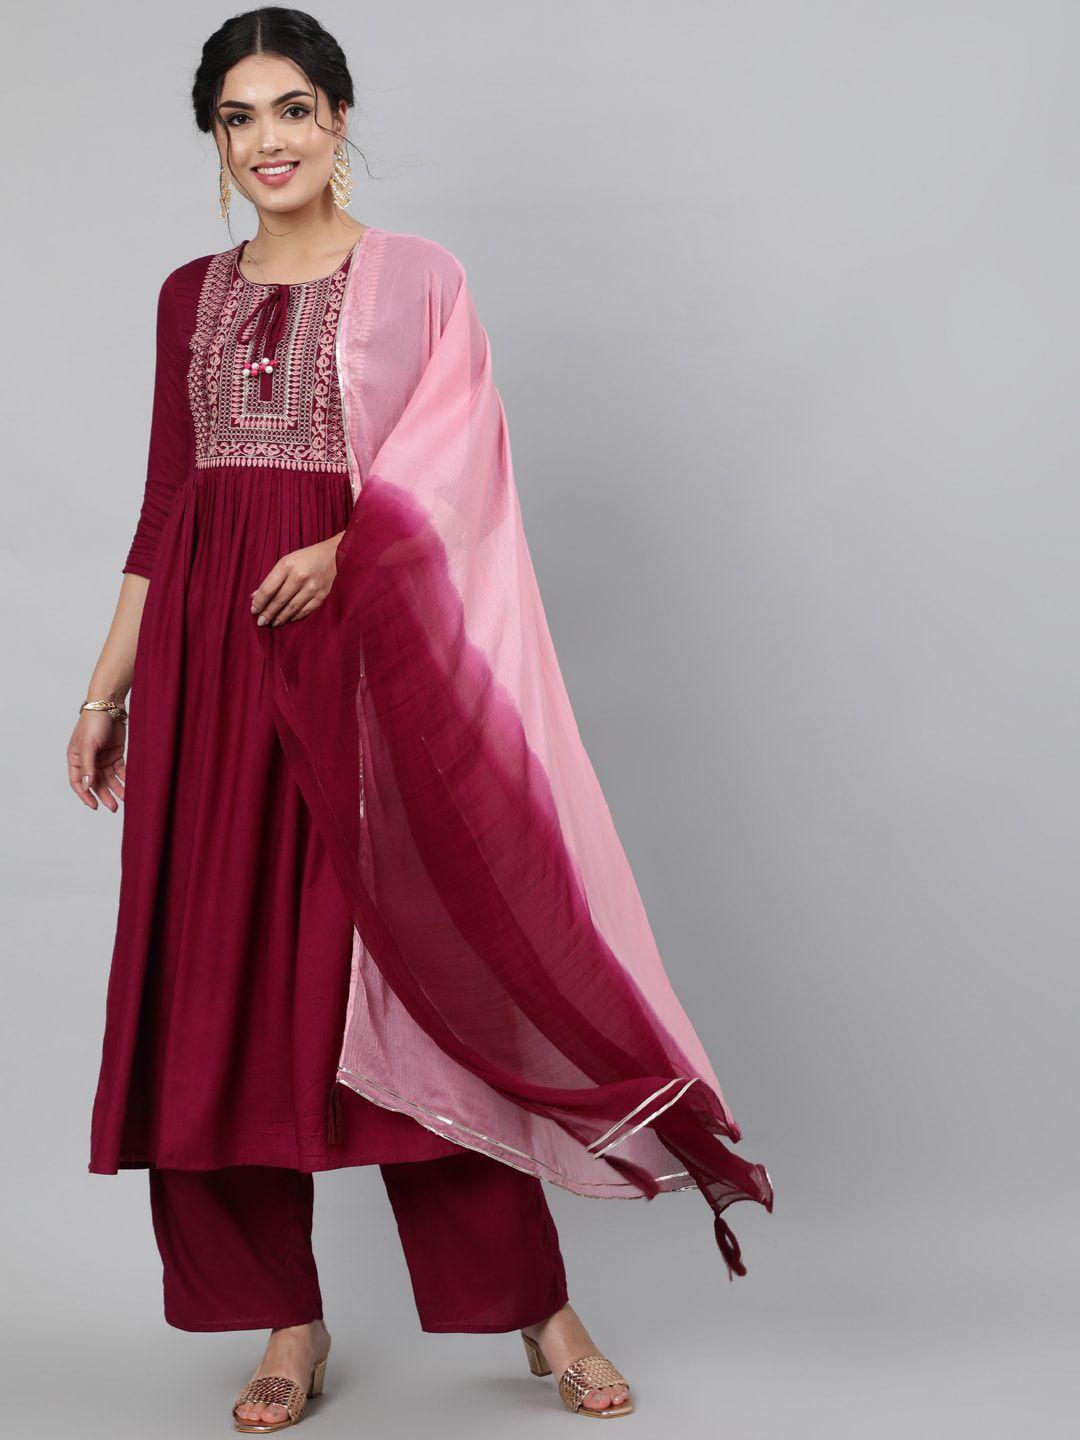 indie closet women maroon floral embroidered kurta with palazzos & with dupatta